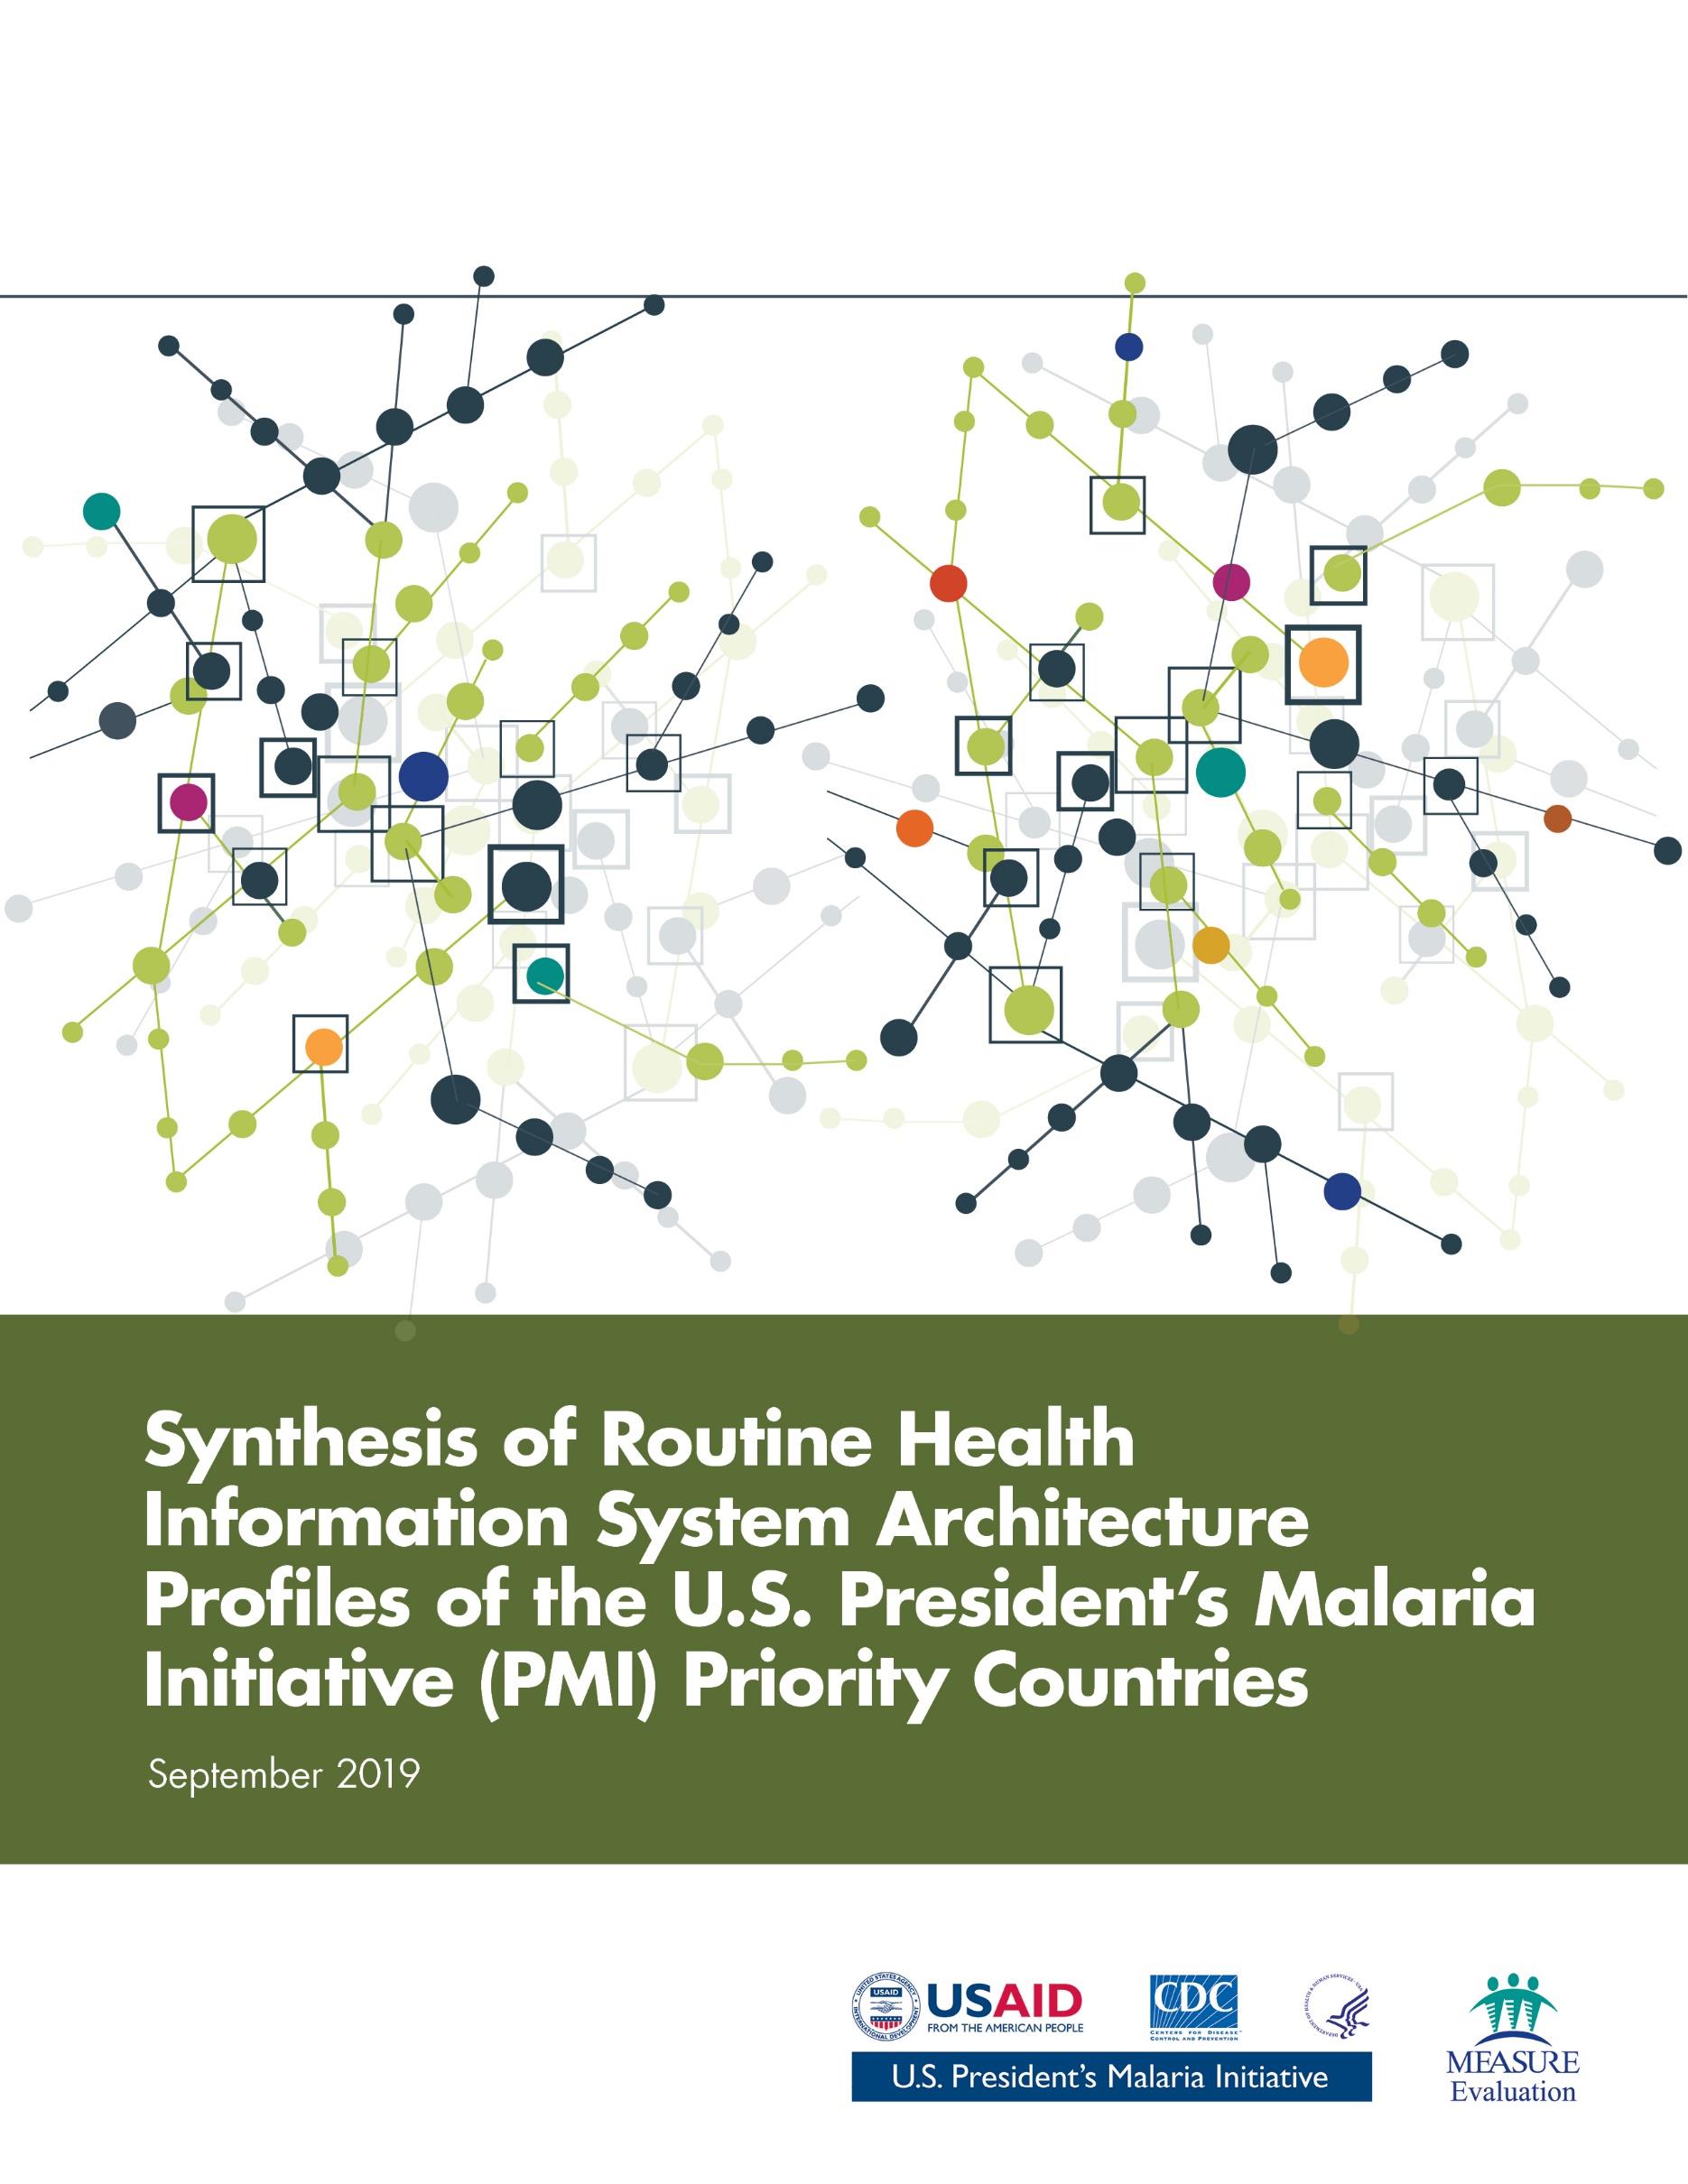 Synthesis of Routine Health Information System Architecture Profiles of the U.S. President’s Malaria Initiative (PMI) Priority Countries